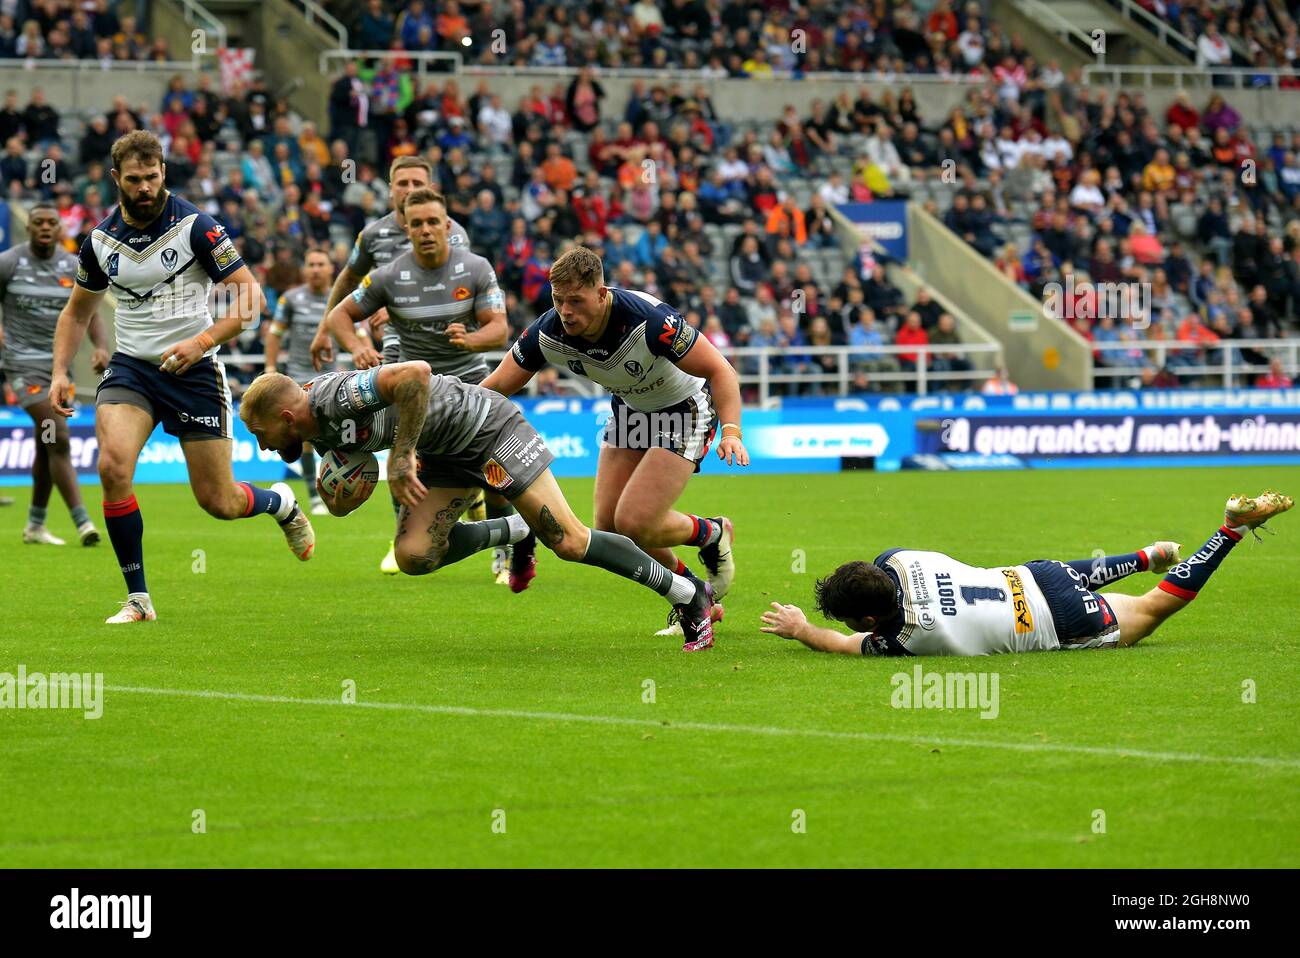 Dacia Magic Weekend 2021, Super League Rugby, Catalans Dragons, Sam Tomkins scoring a try against St Helens, St James Park stadium, Newcastle. UK Stock Photo